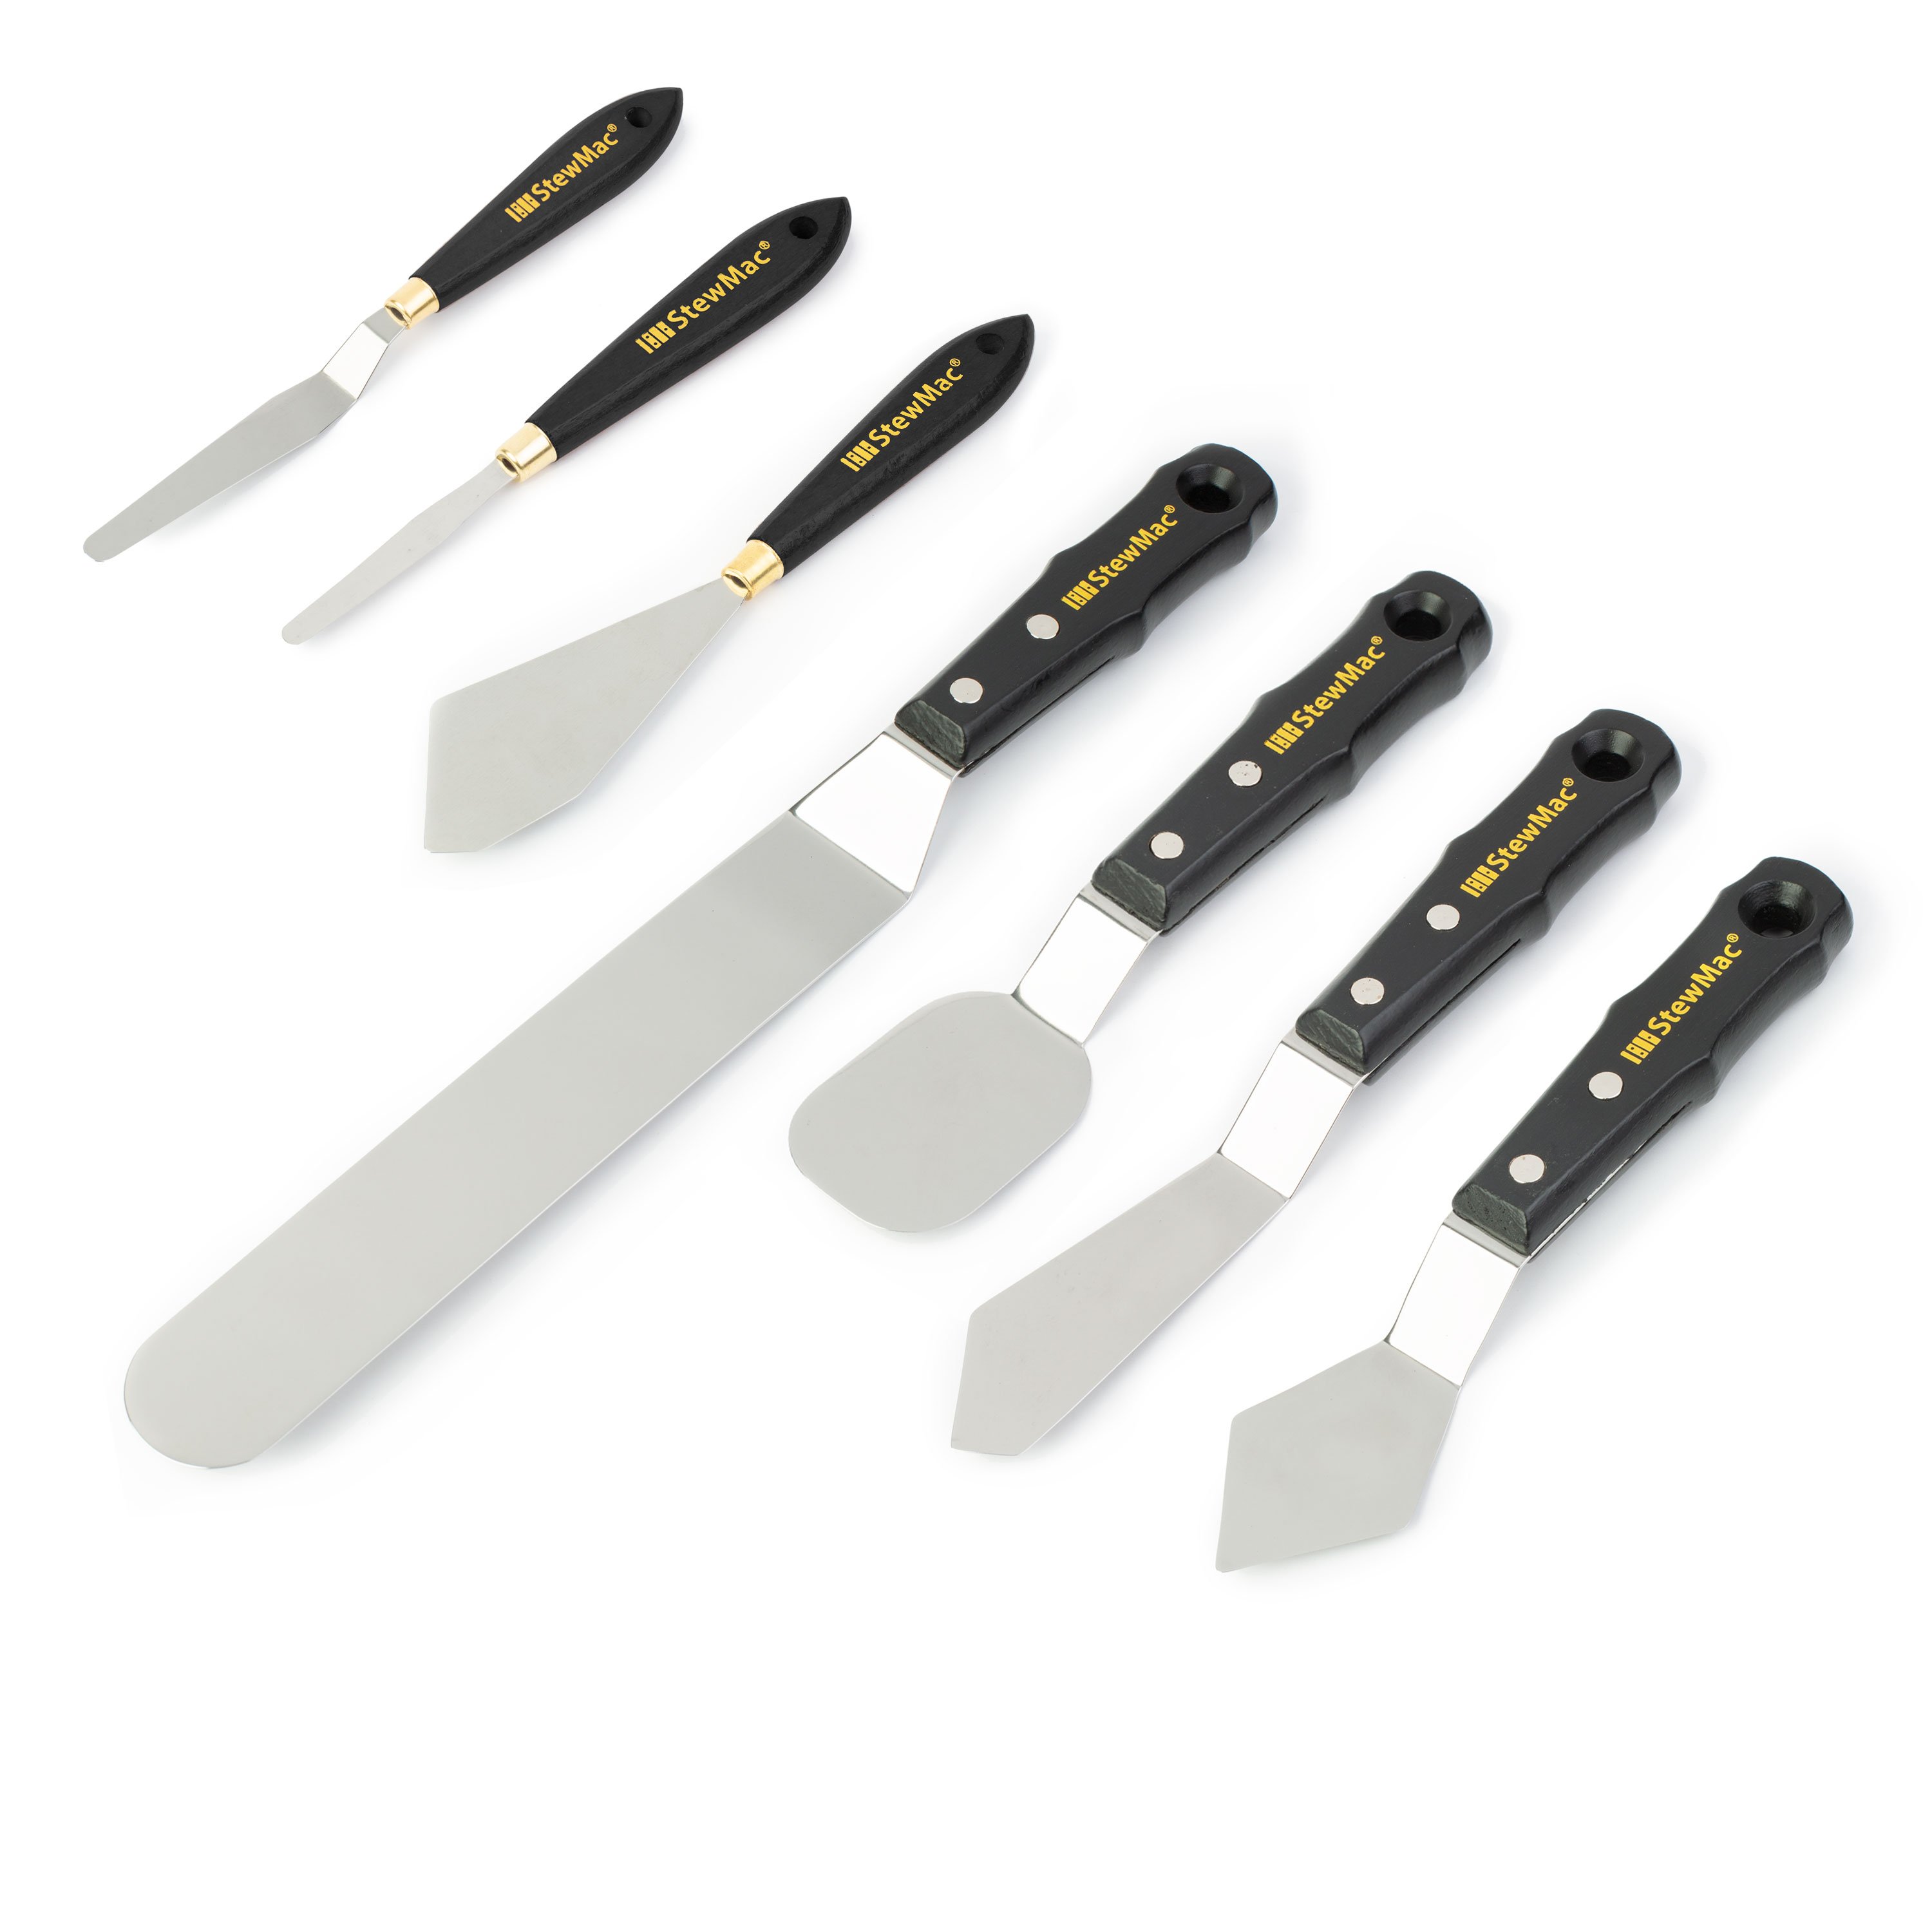 7 Pieces Large Painting Knives Stainless Steel Spatula Palette